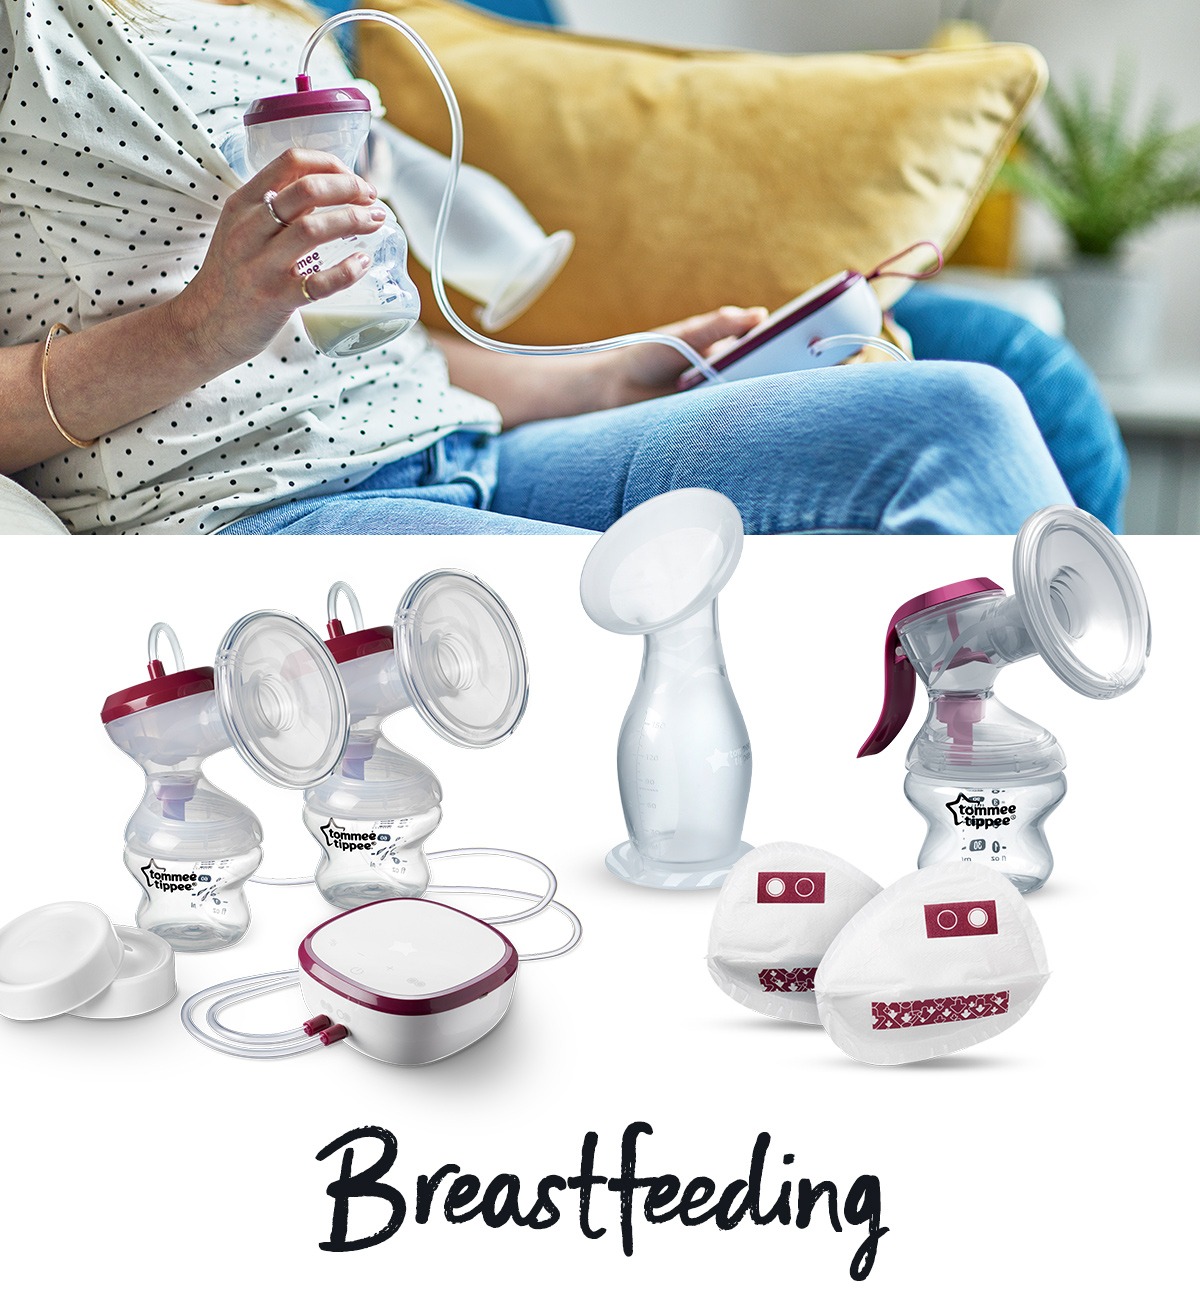 Tommee Tippee Breastfeeding products